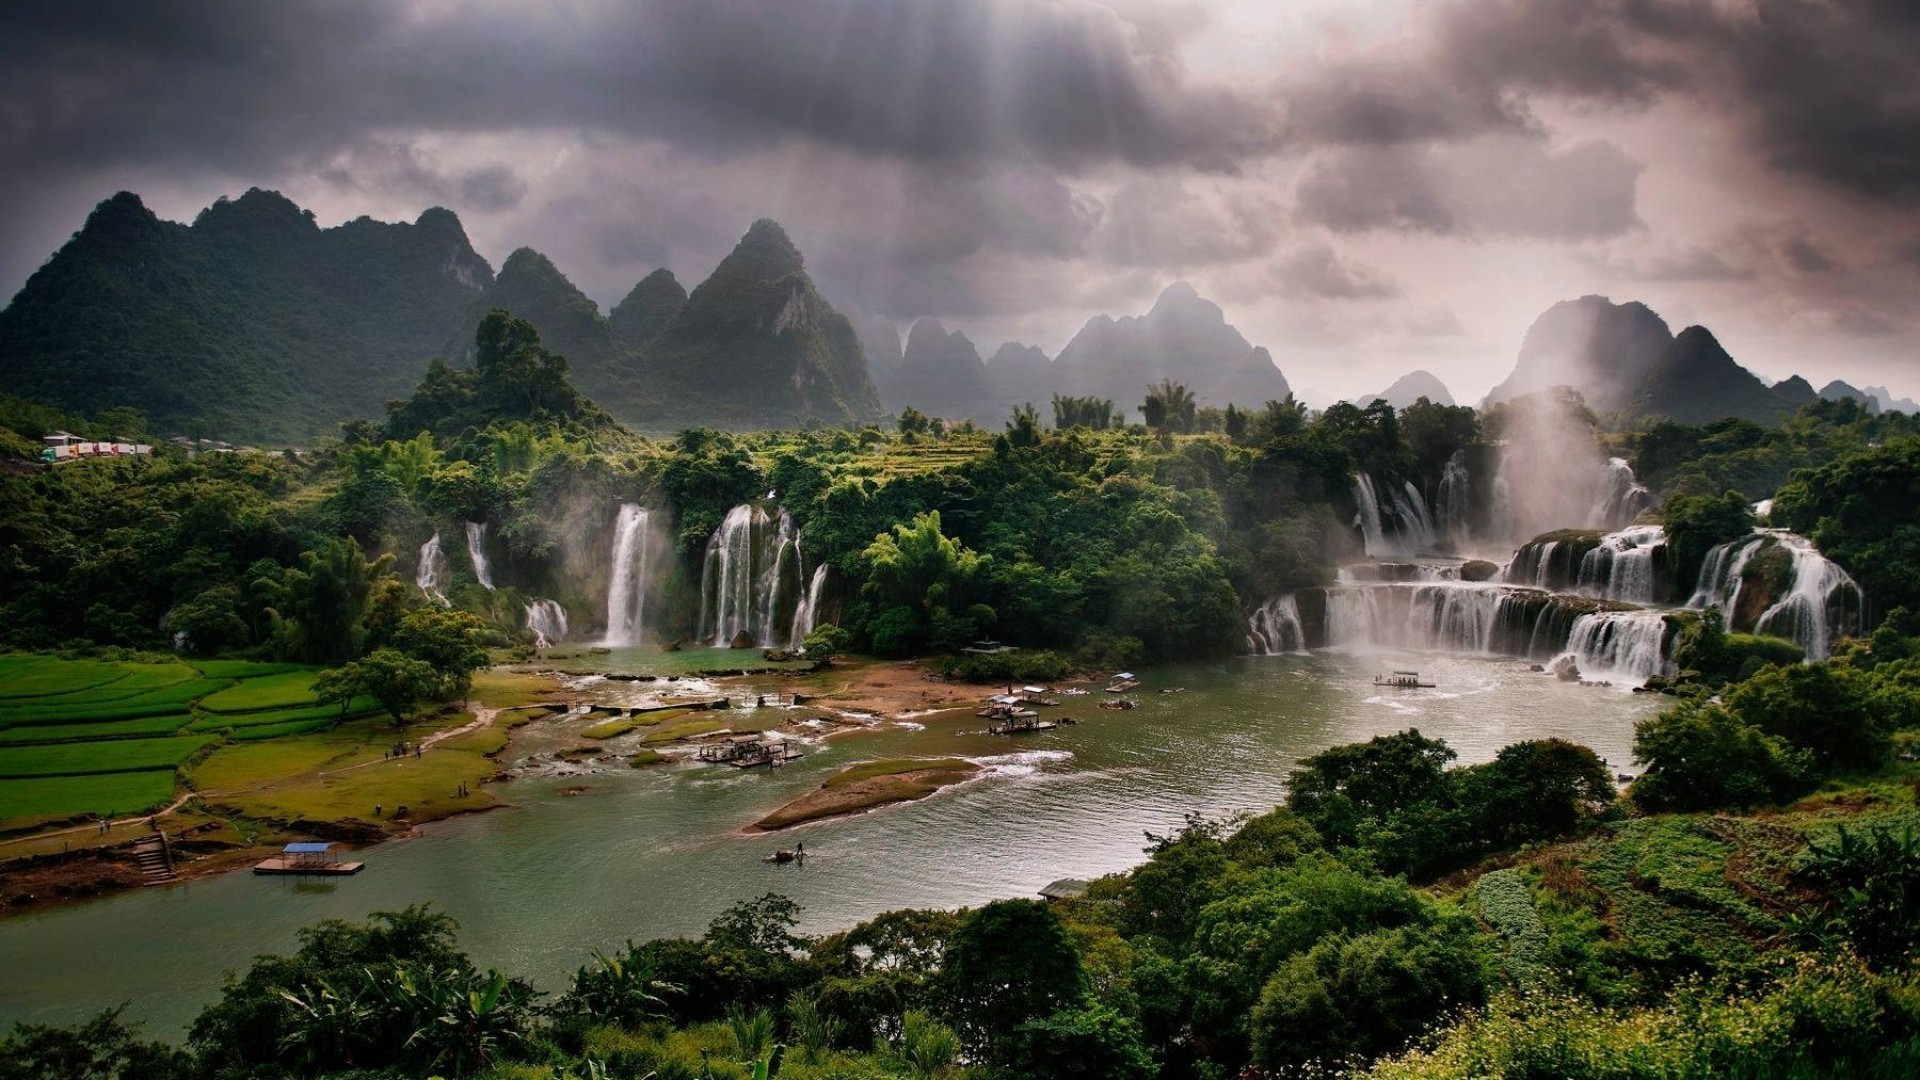 General 1920x1080 landscape river waterfall mountains overcast Vietnam nature